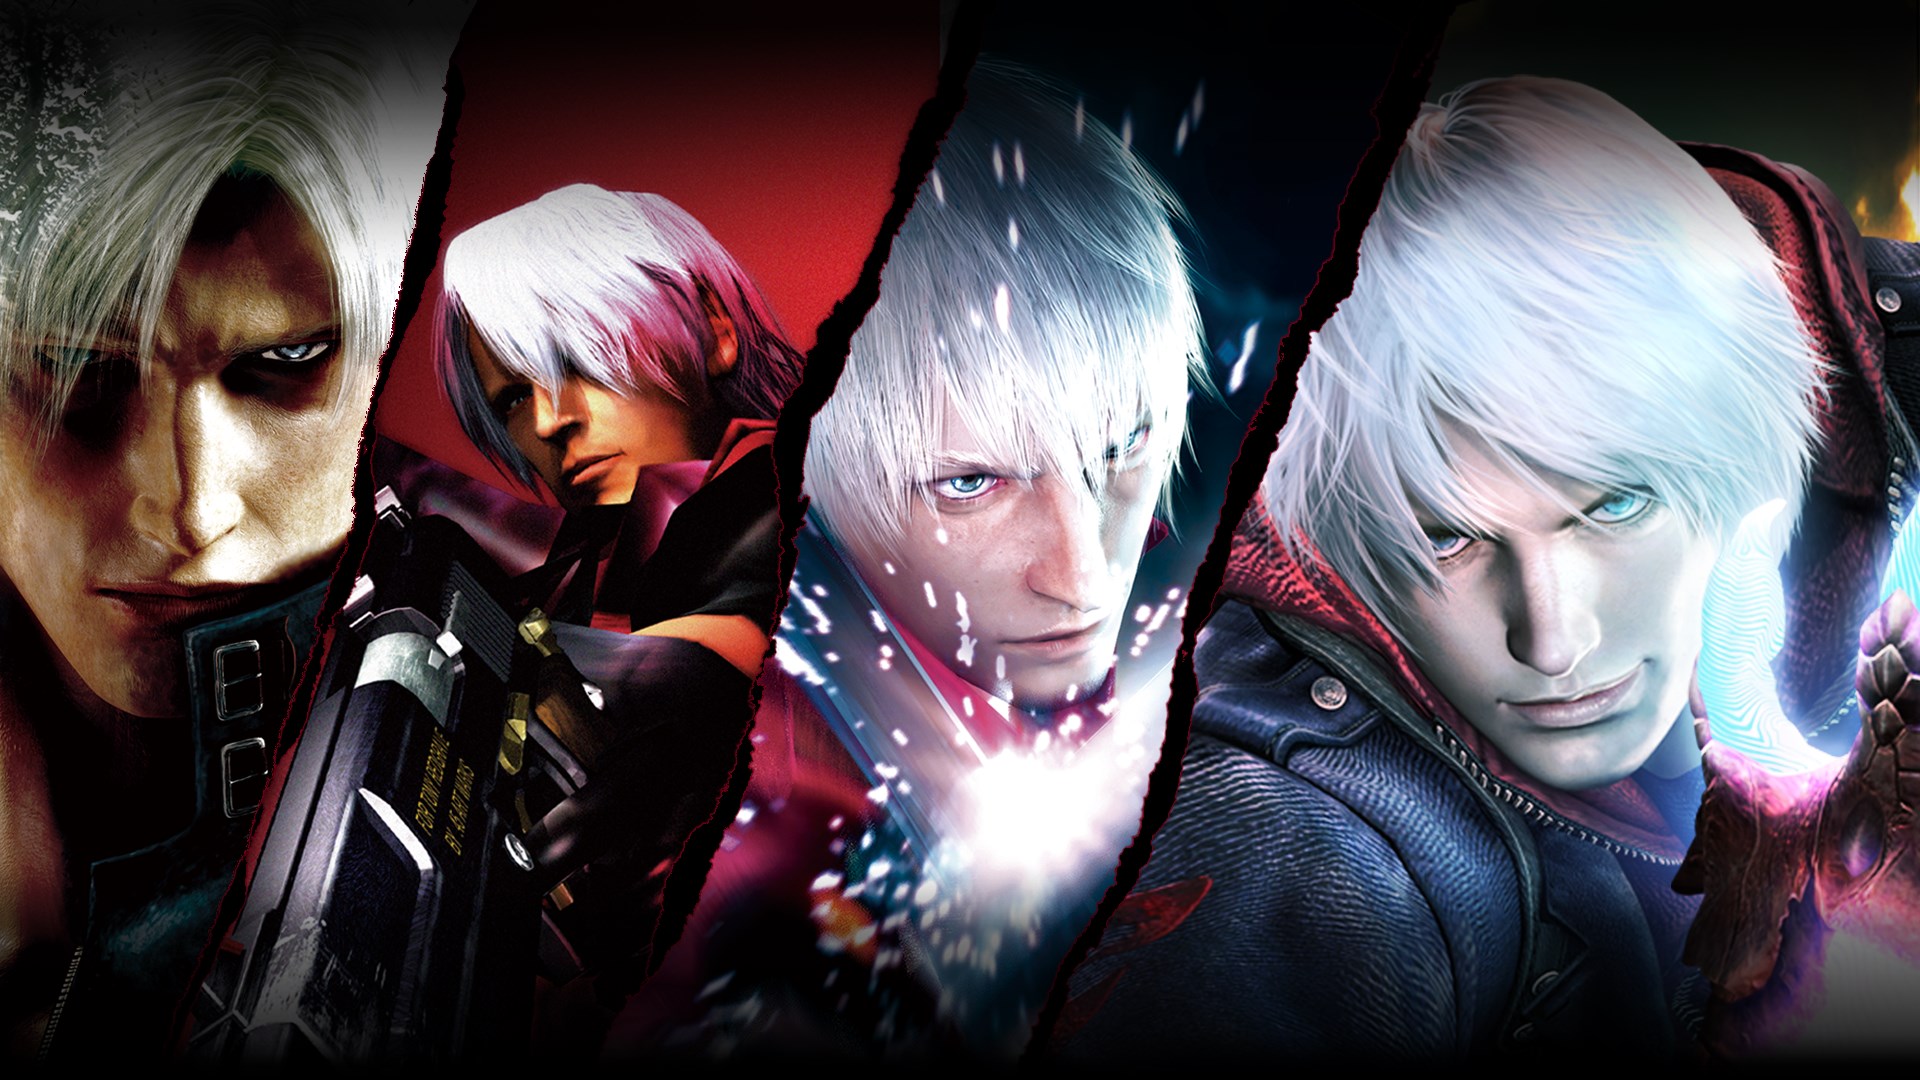 devil may cry hd collection & 4se bundle ps4